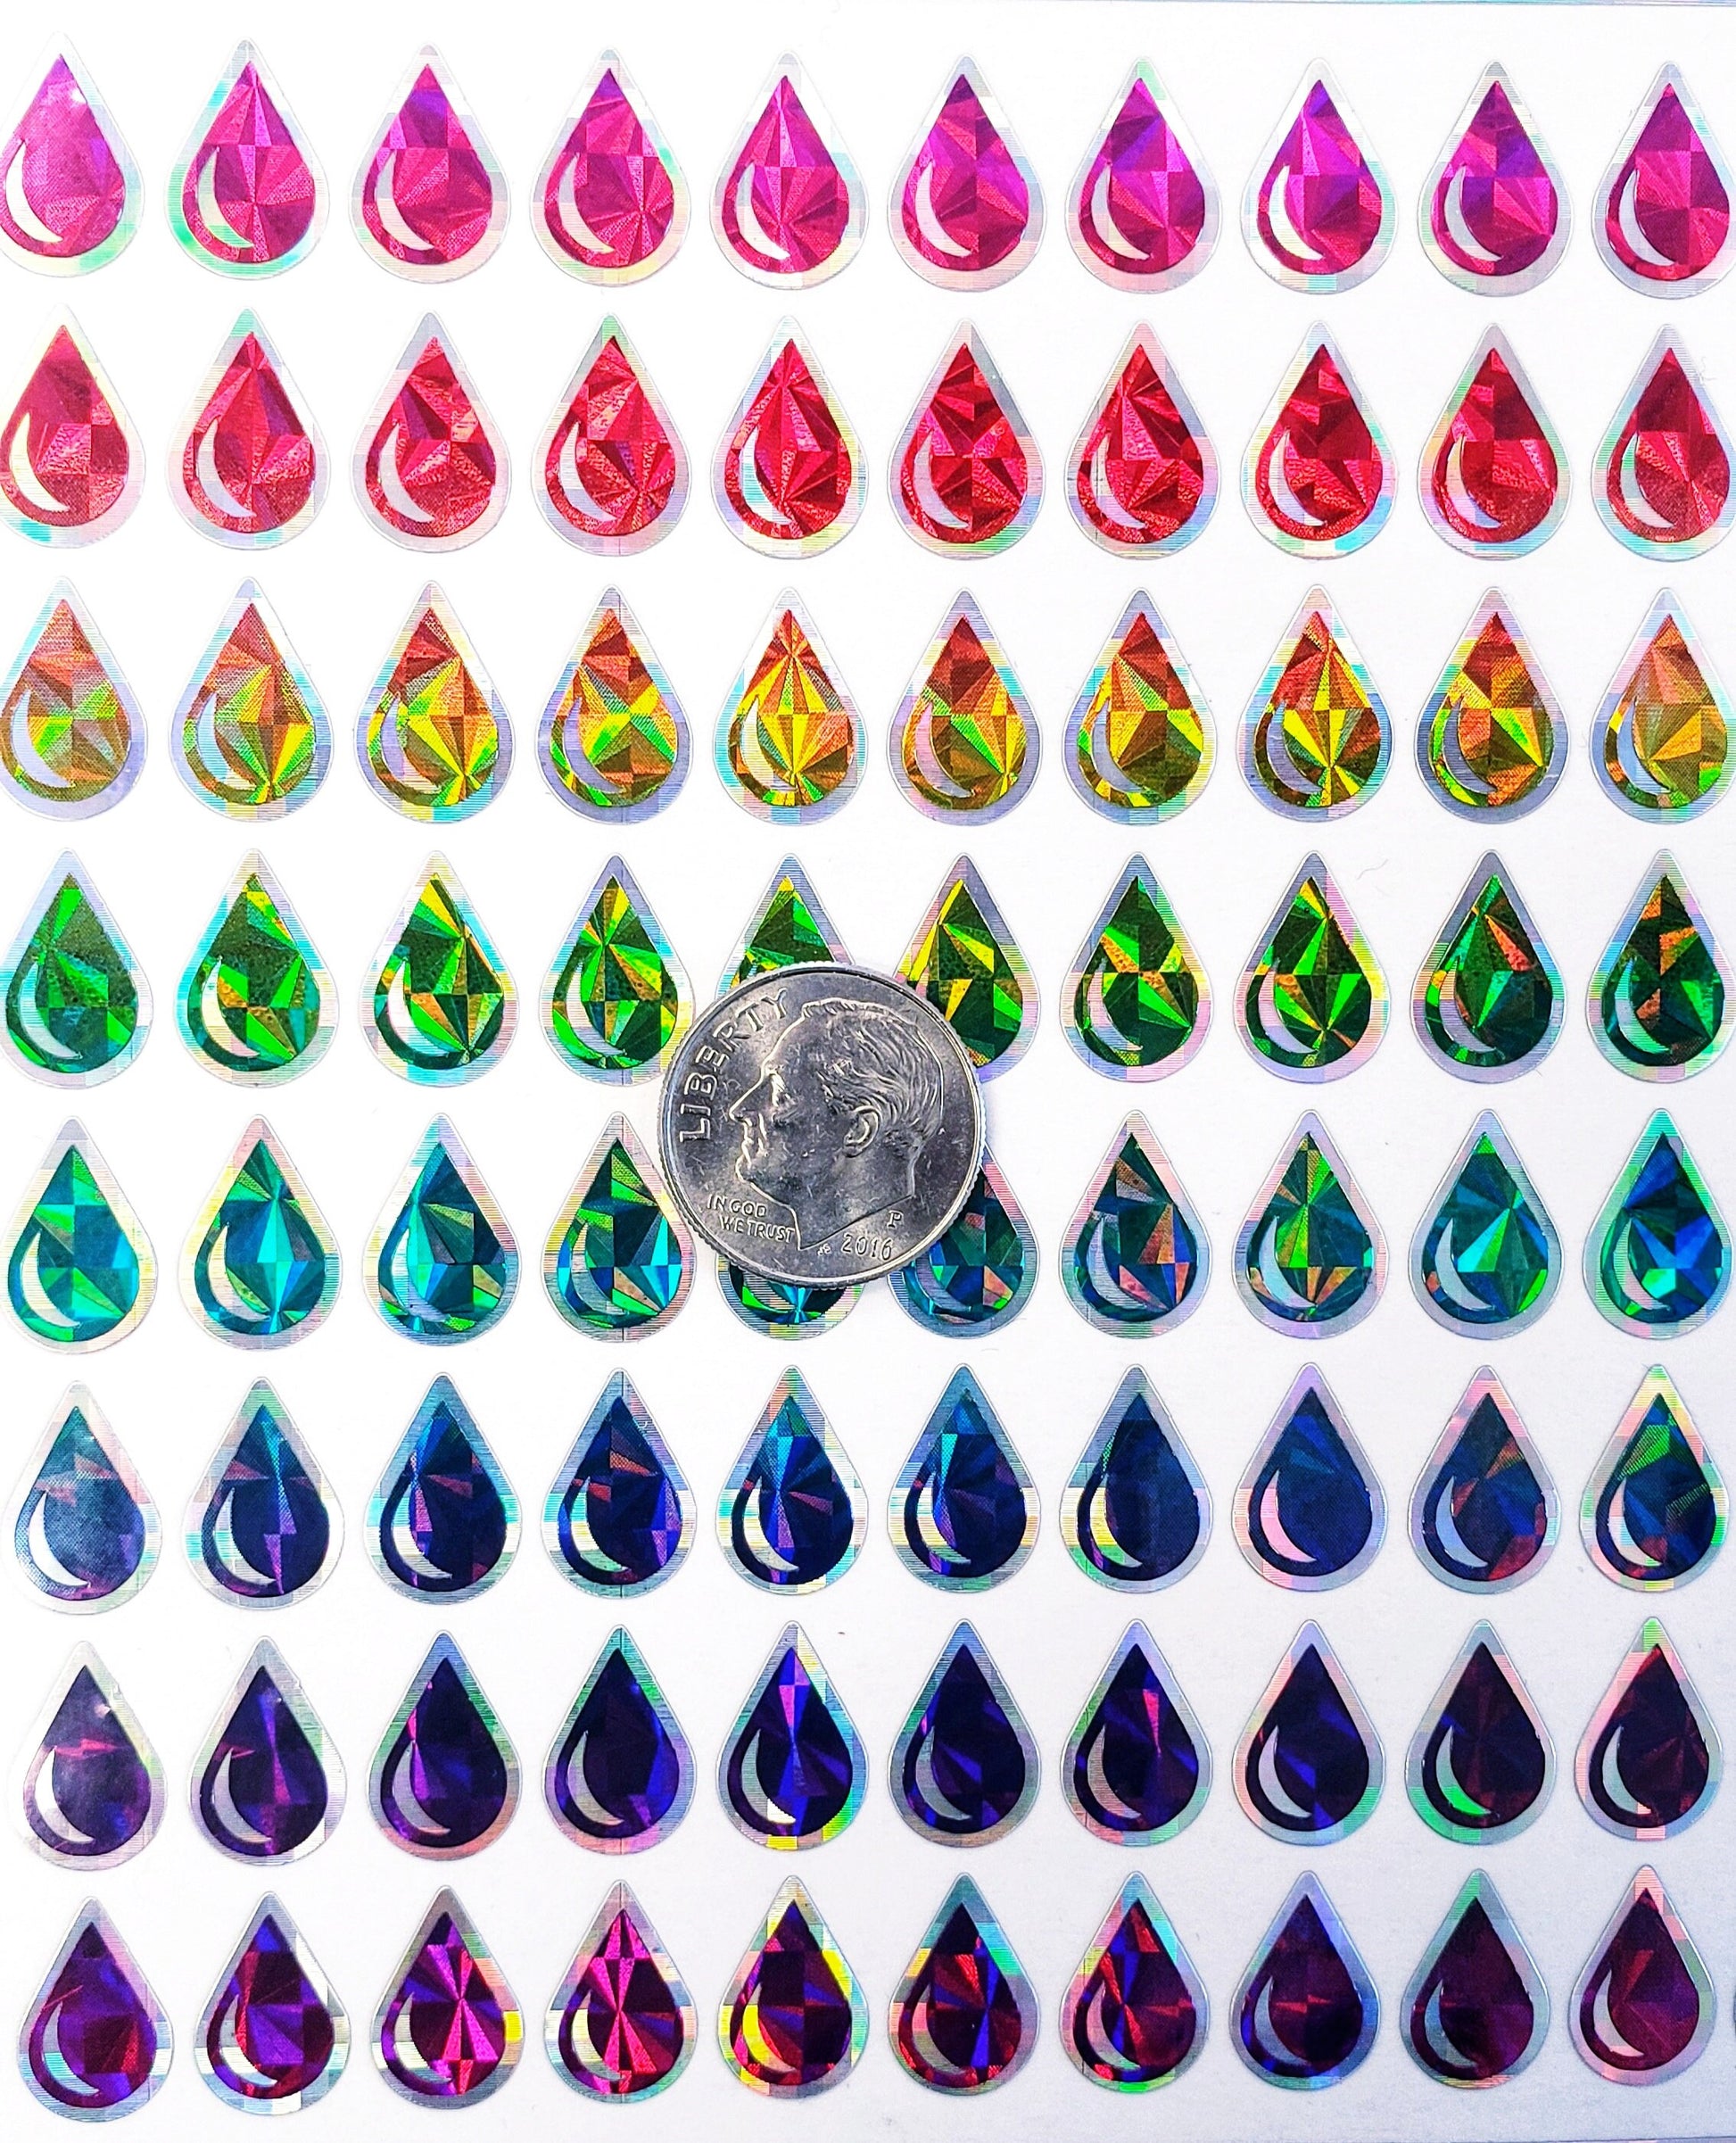 Rainbow Drop Stickers, set of 136 water drop shaped sparkly stickers, decorate your own bottle or journal with rainbow stickers, Pride month